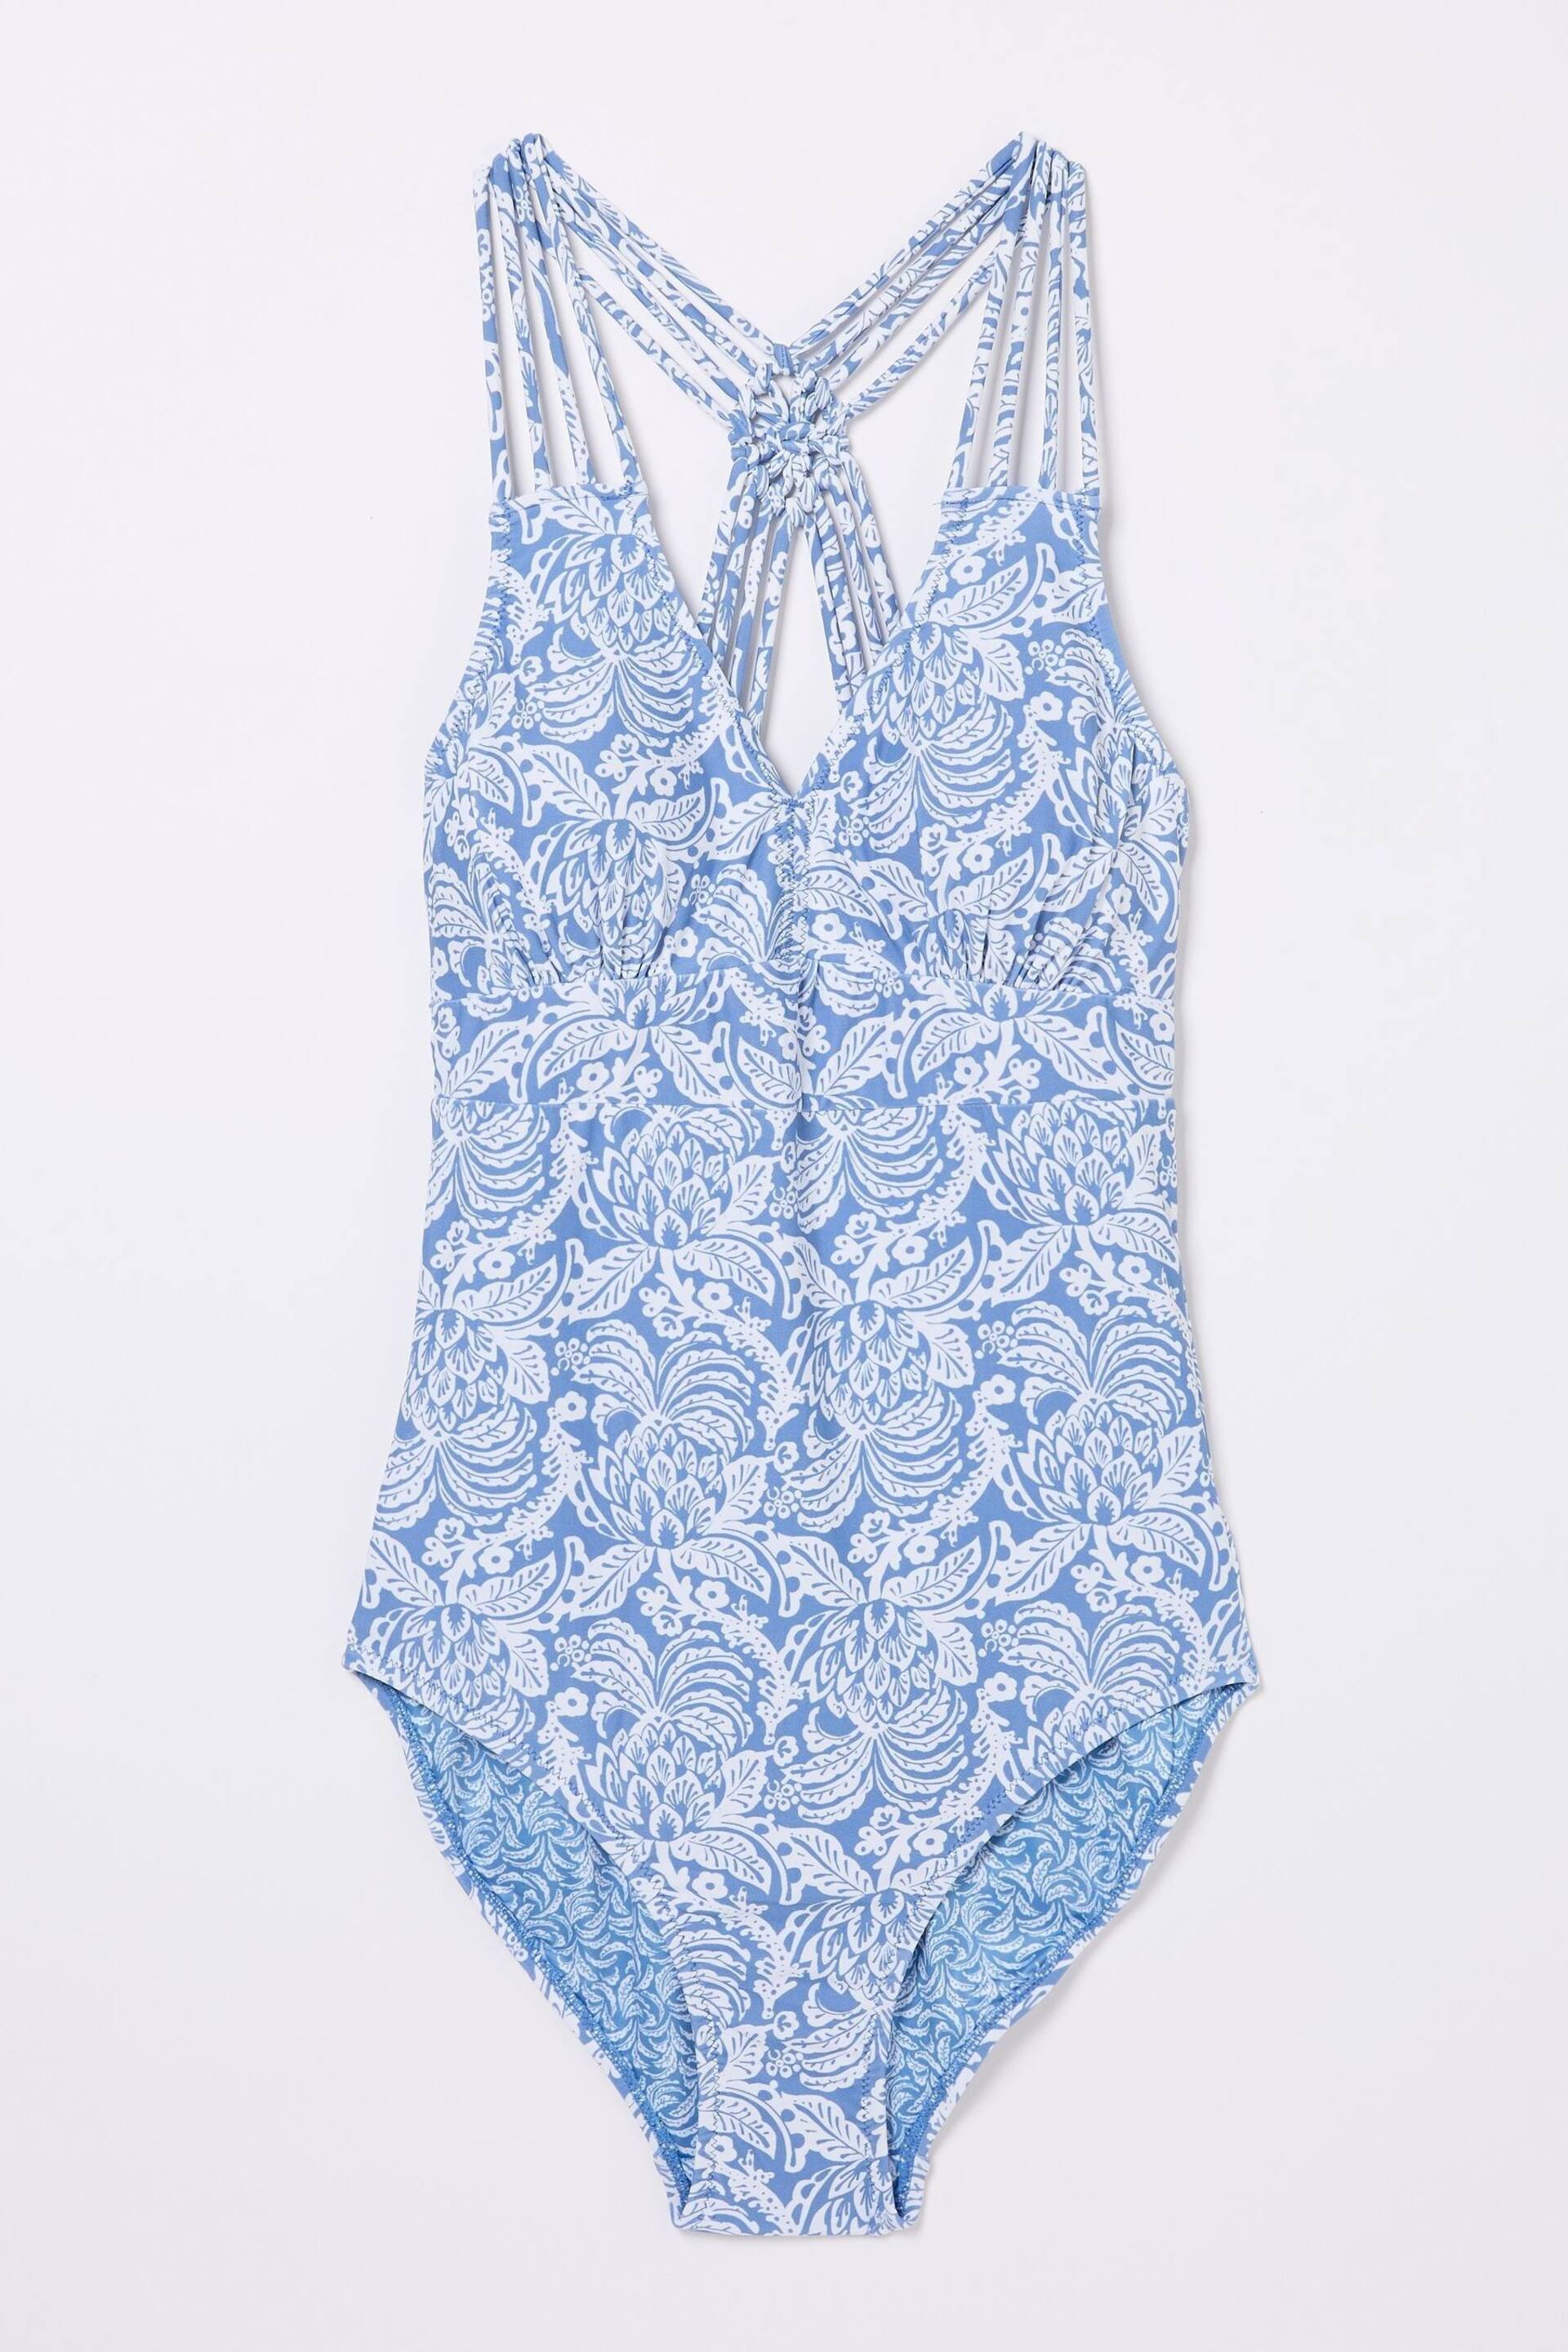 FatFace Blue Ani Damask Floral Swimsuit - Image 5 of 5